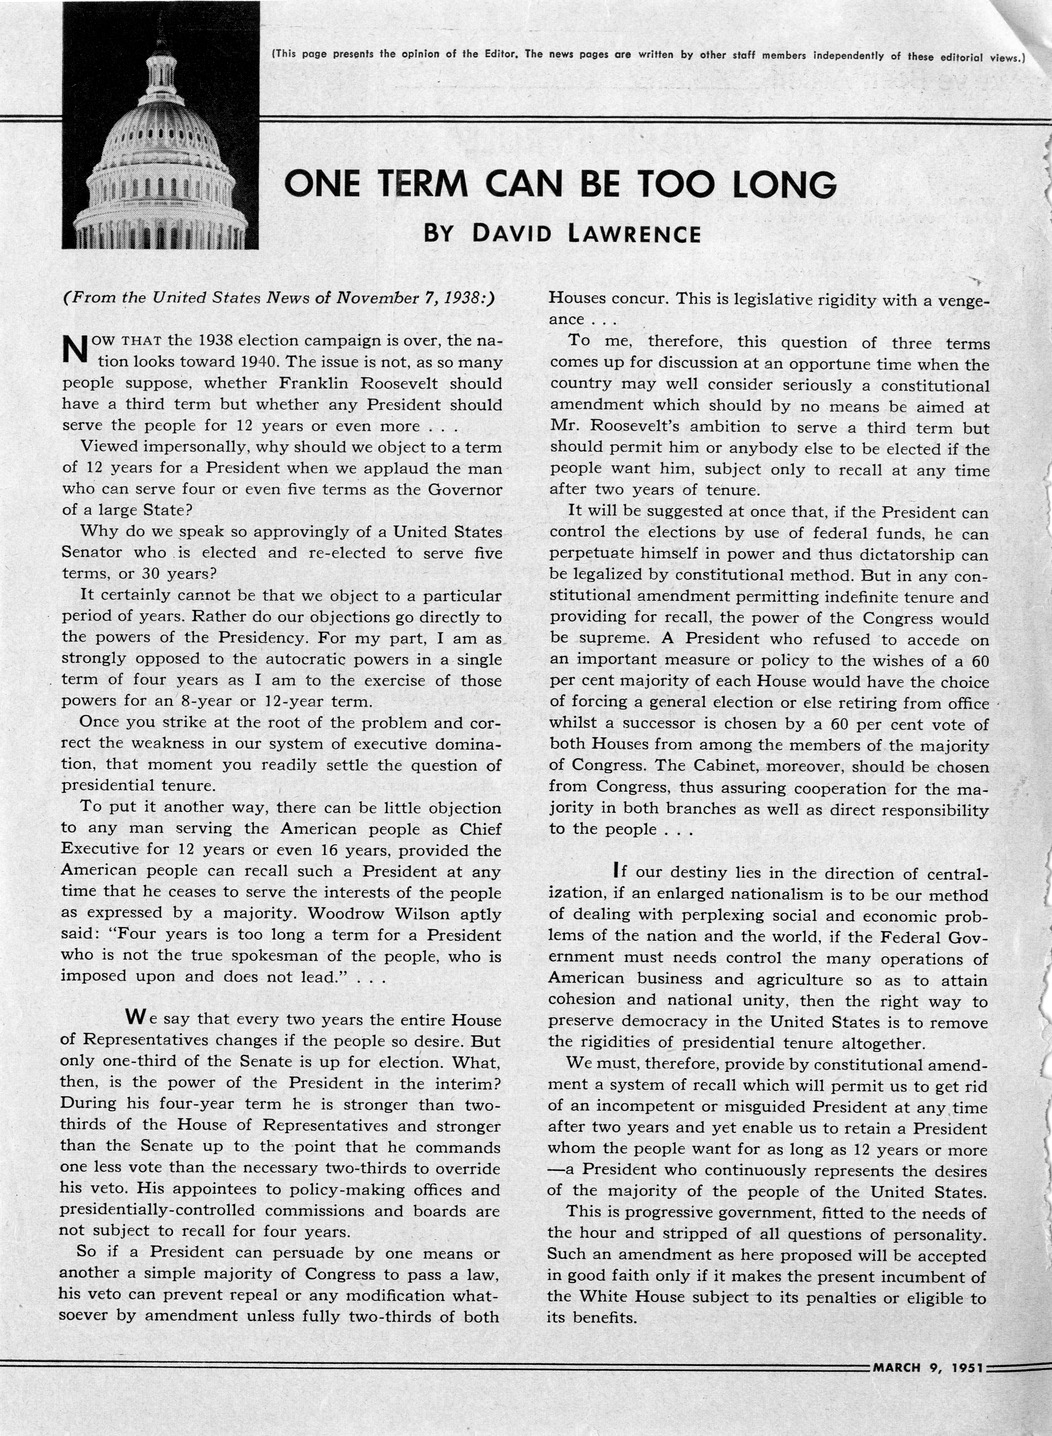 Newspaper Article by David Lawrence, One Term Can Be Too Long